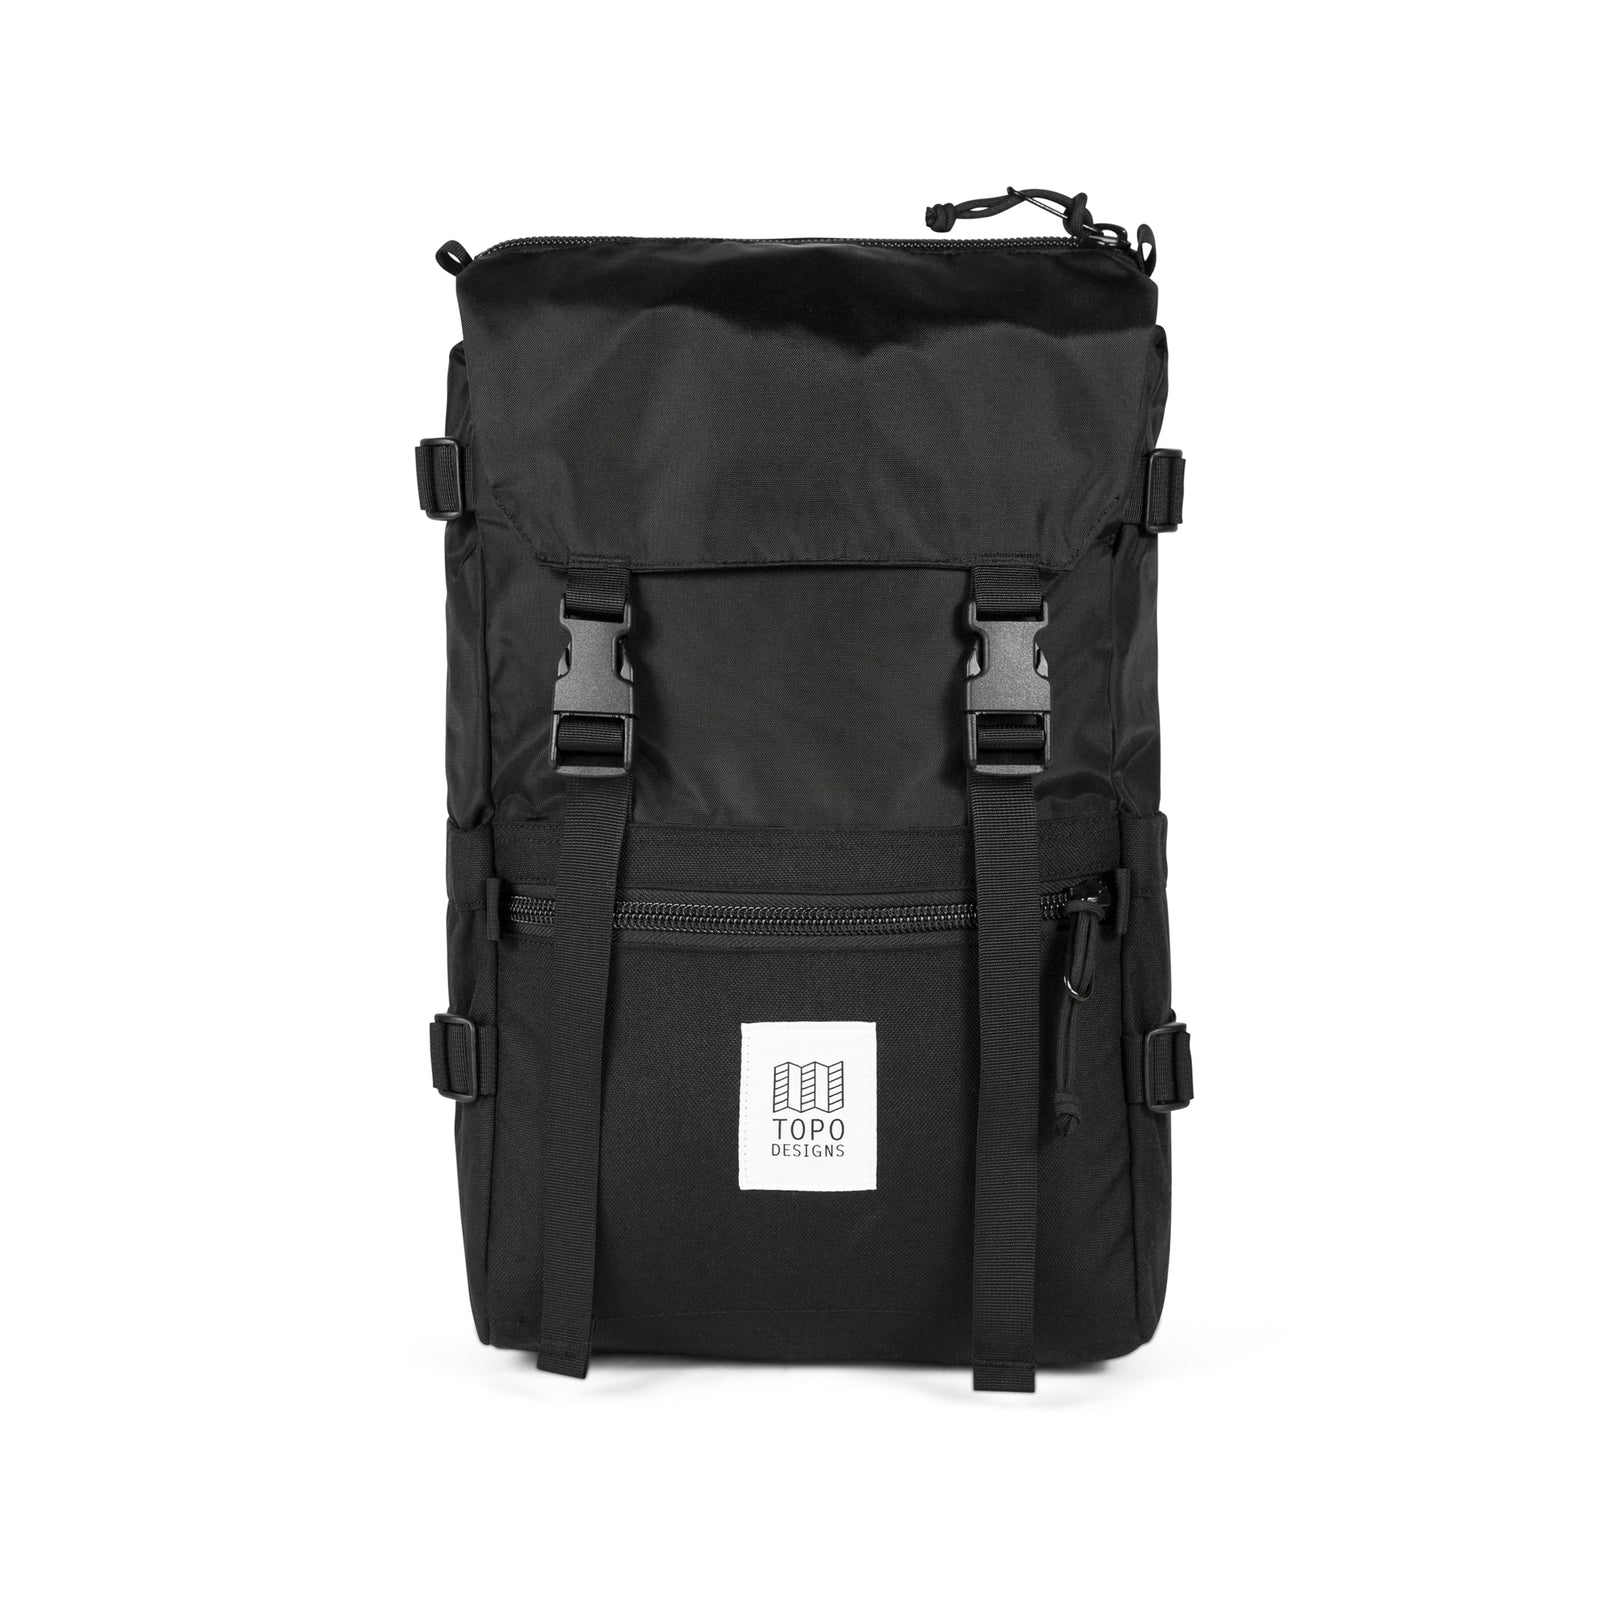 Front Product Shot of the Topo Designs Rover Pack Classic in "Black".